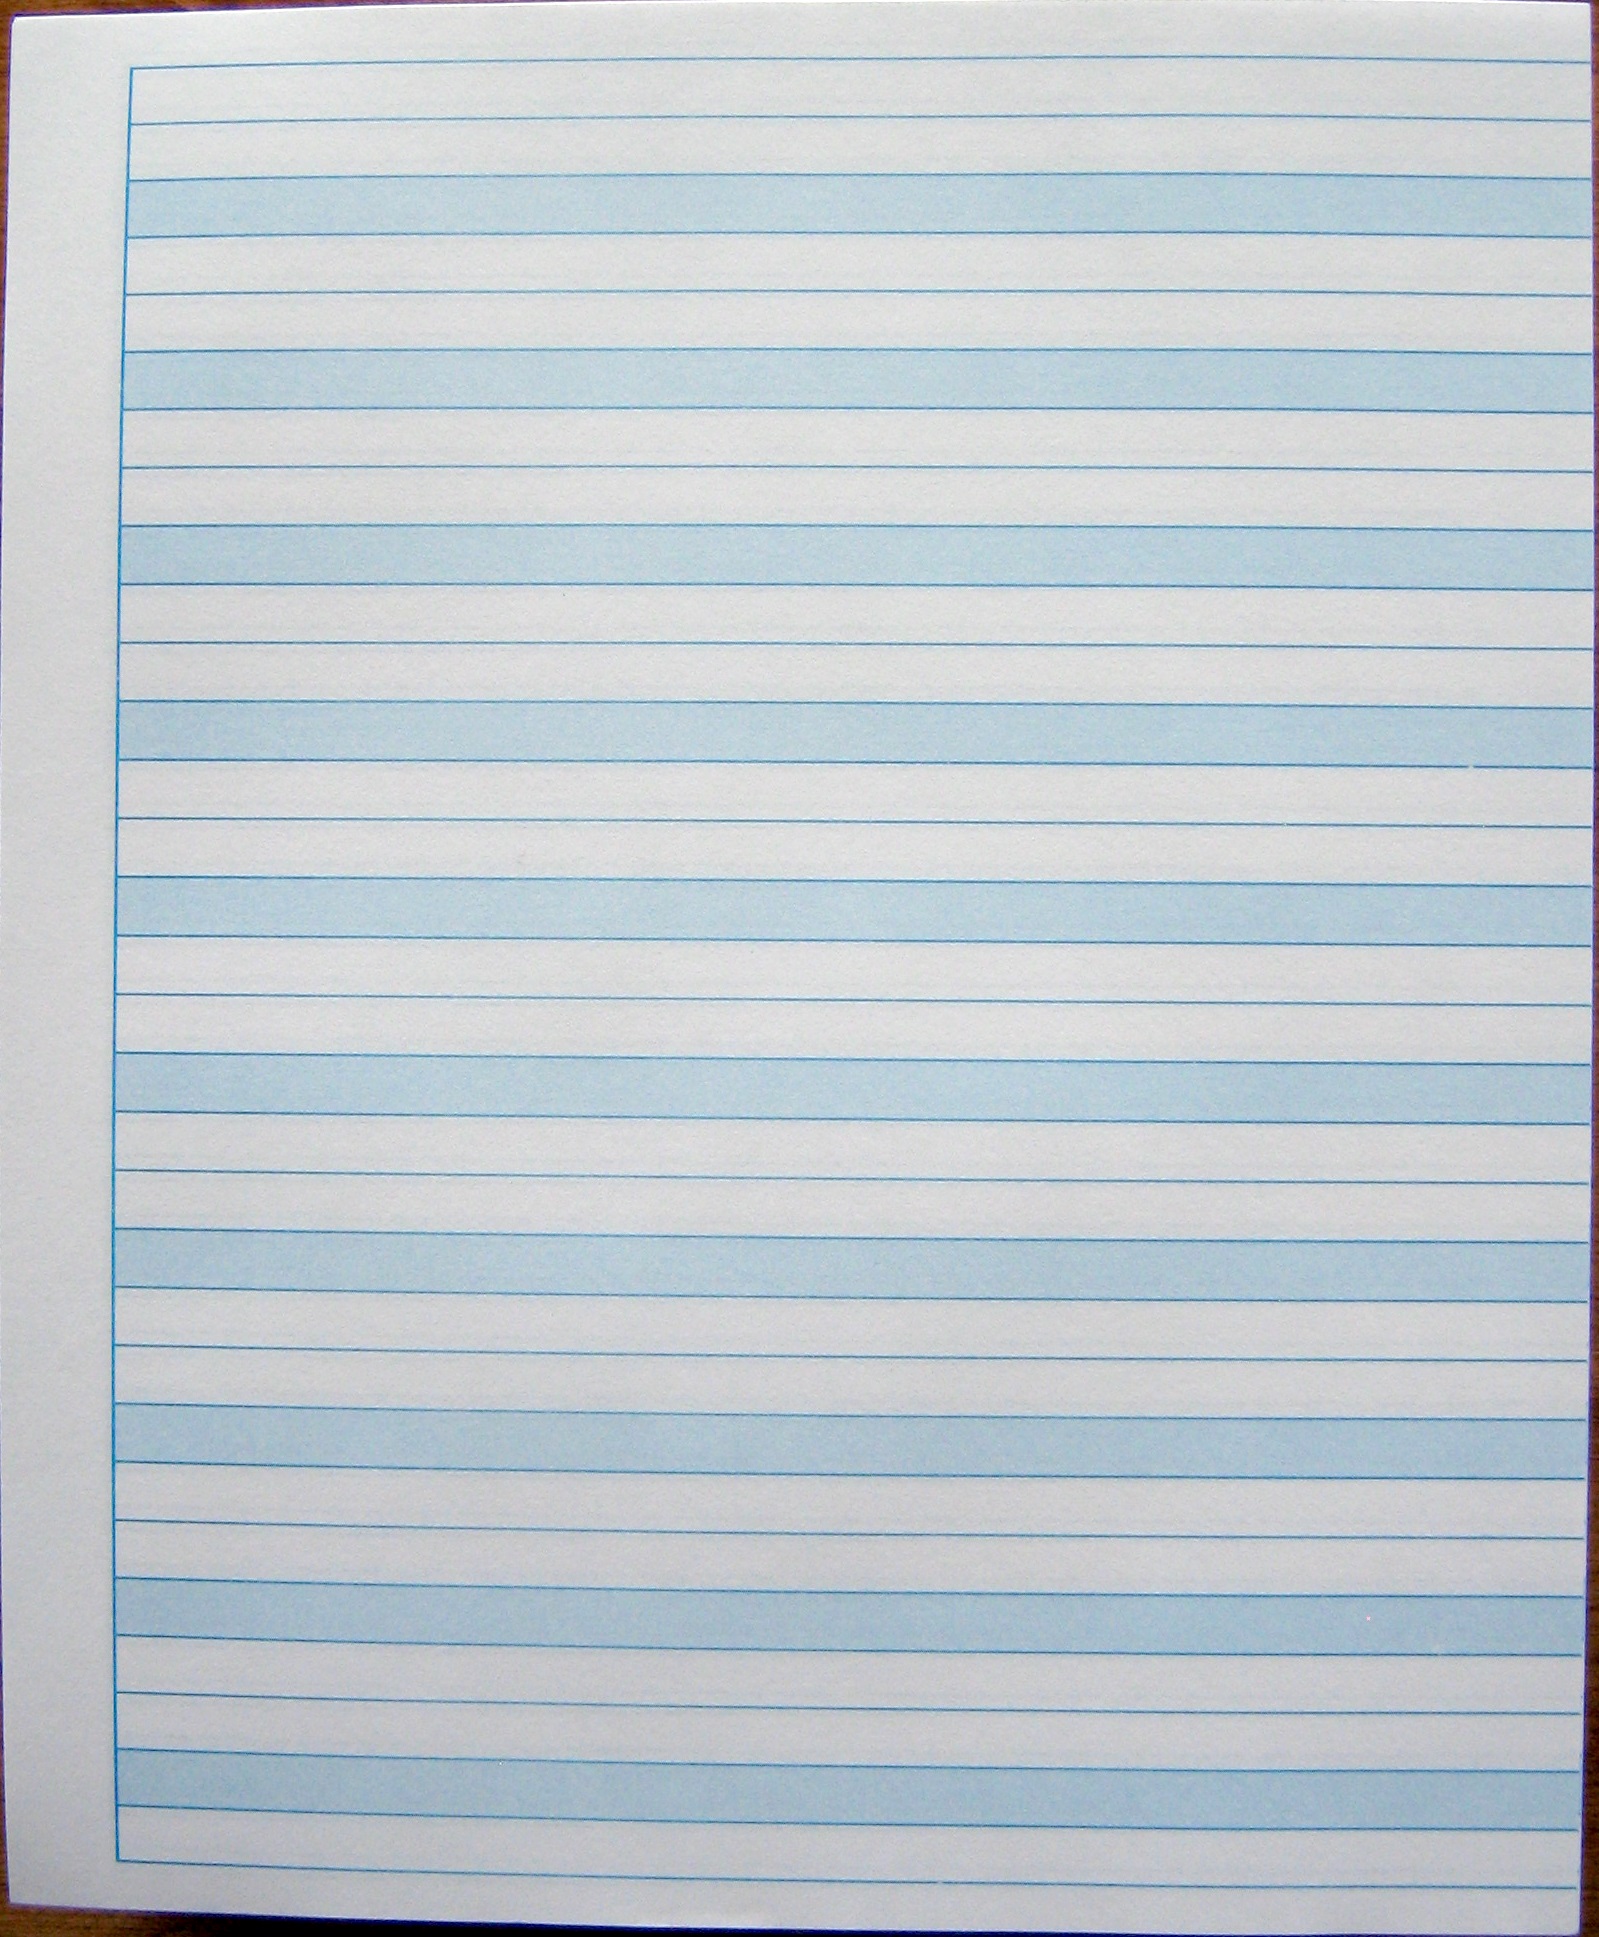 56 Blue Shaded Writing Paper - Sheet Size 8.5